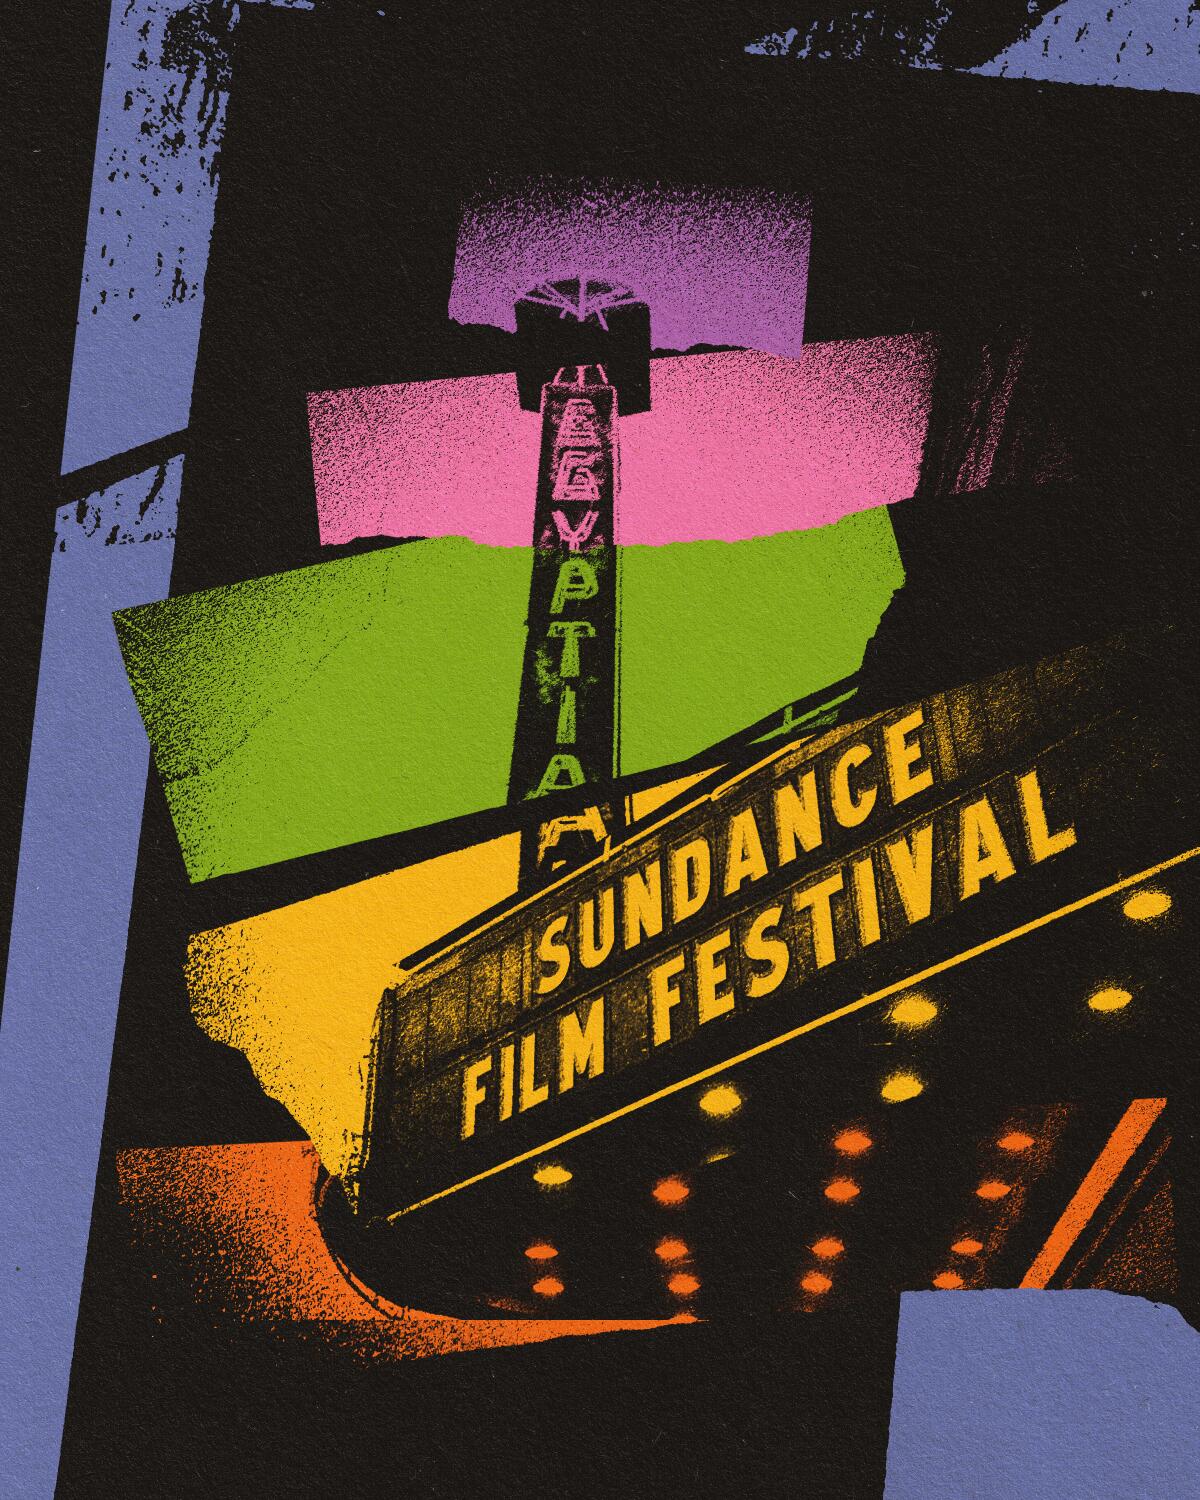 Sundance Film Festival: 8 insider tips if you plan to apply - Los Angeles  Times